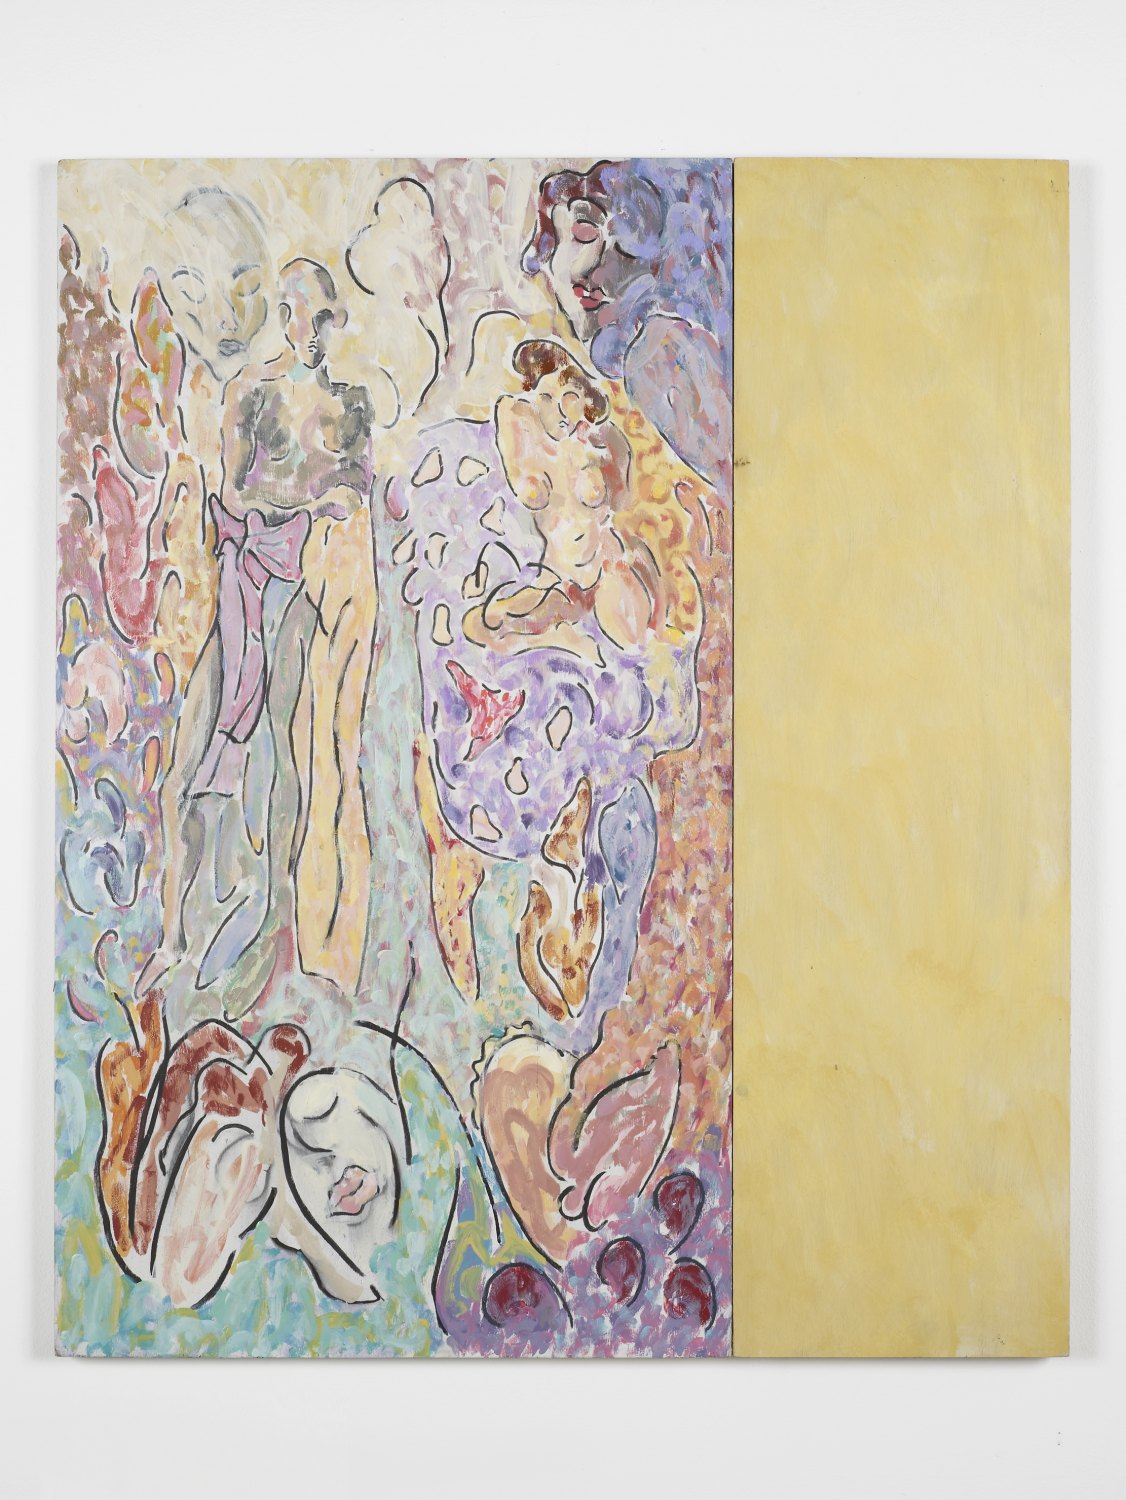 Marc Camille Chaimowicz After PB. (1), 1985 - 1990 Oil and charcoal on board and canvas, 92 × 110 cm